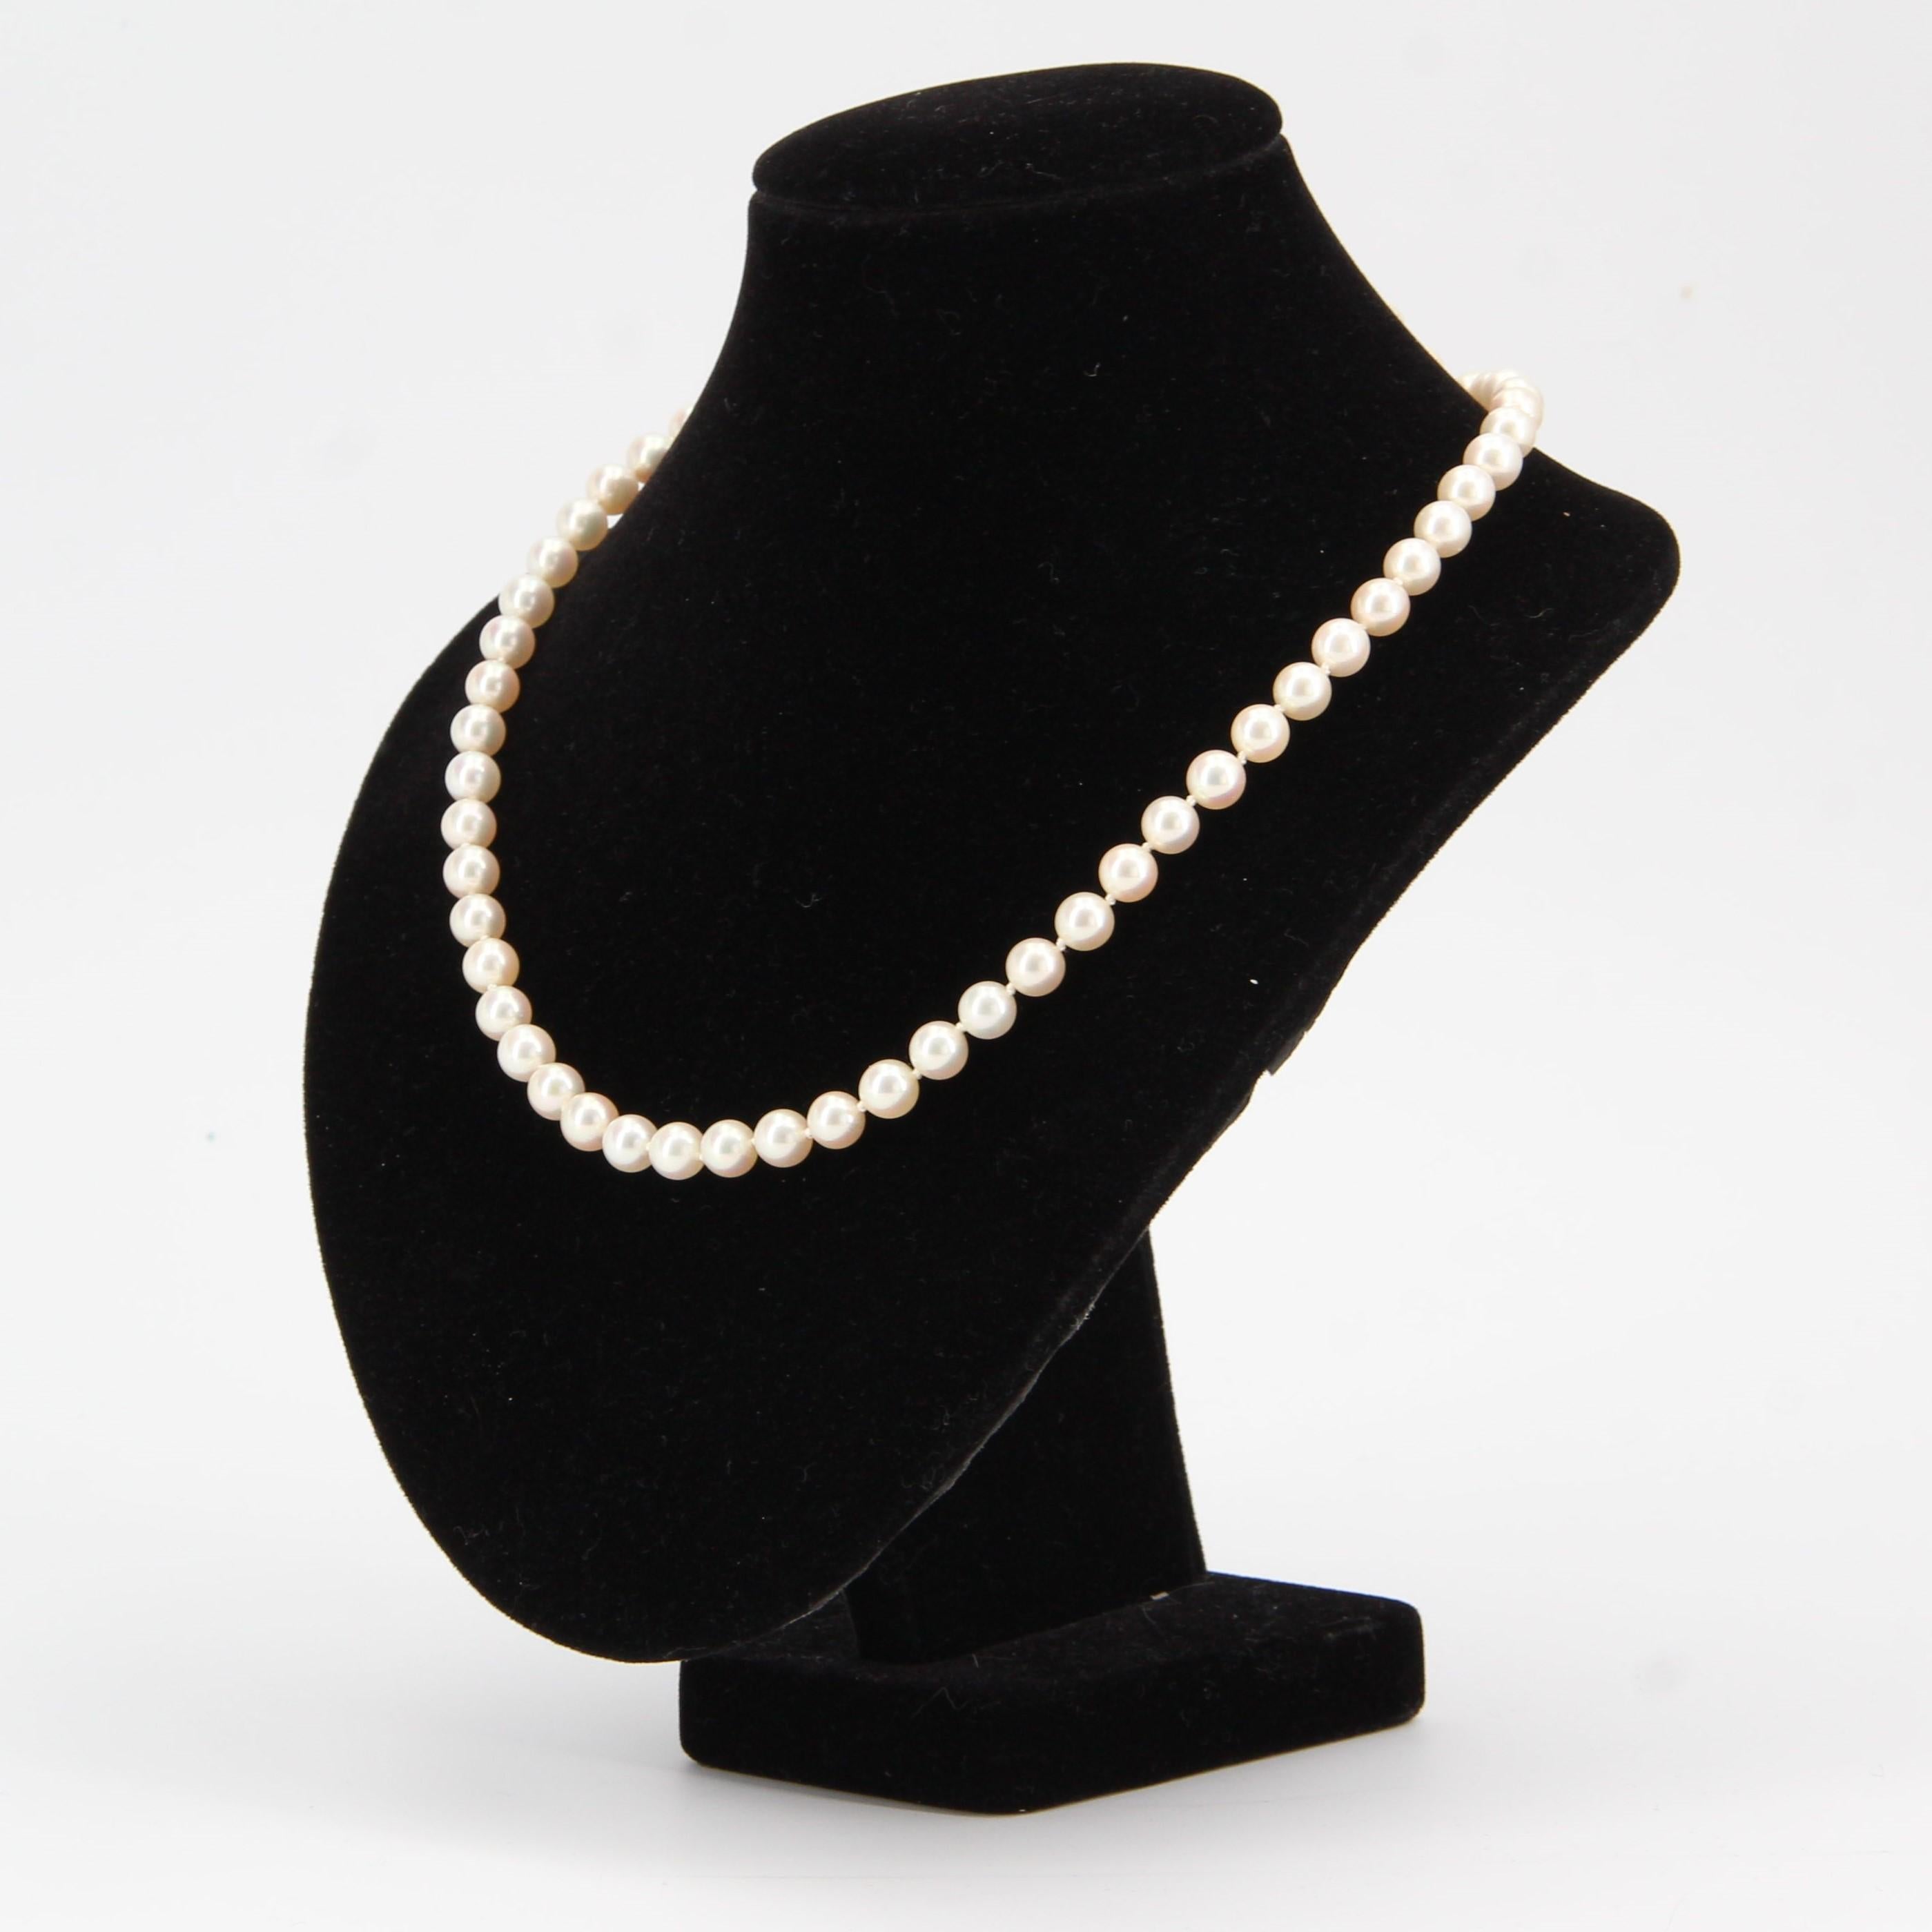 French 1950s Japanese Cultured Pearls Chocker Necklace For Sale 1